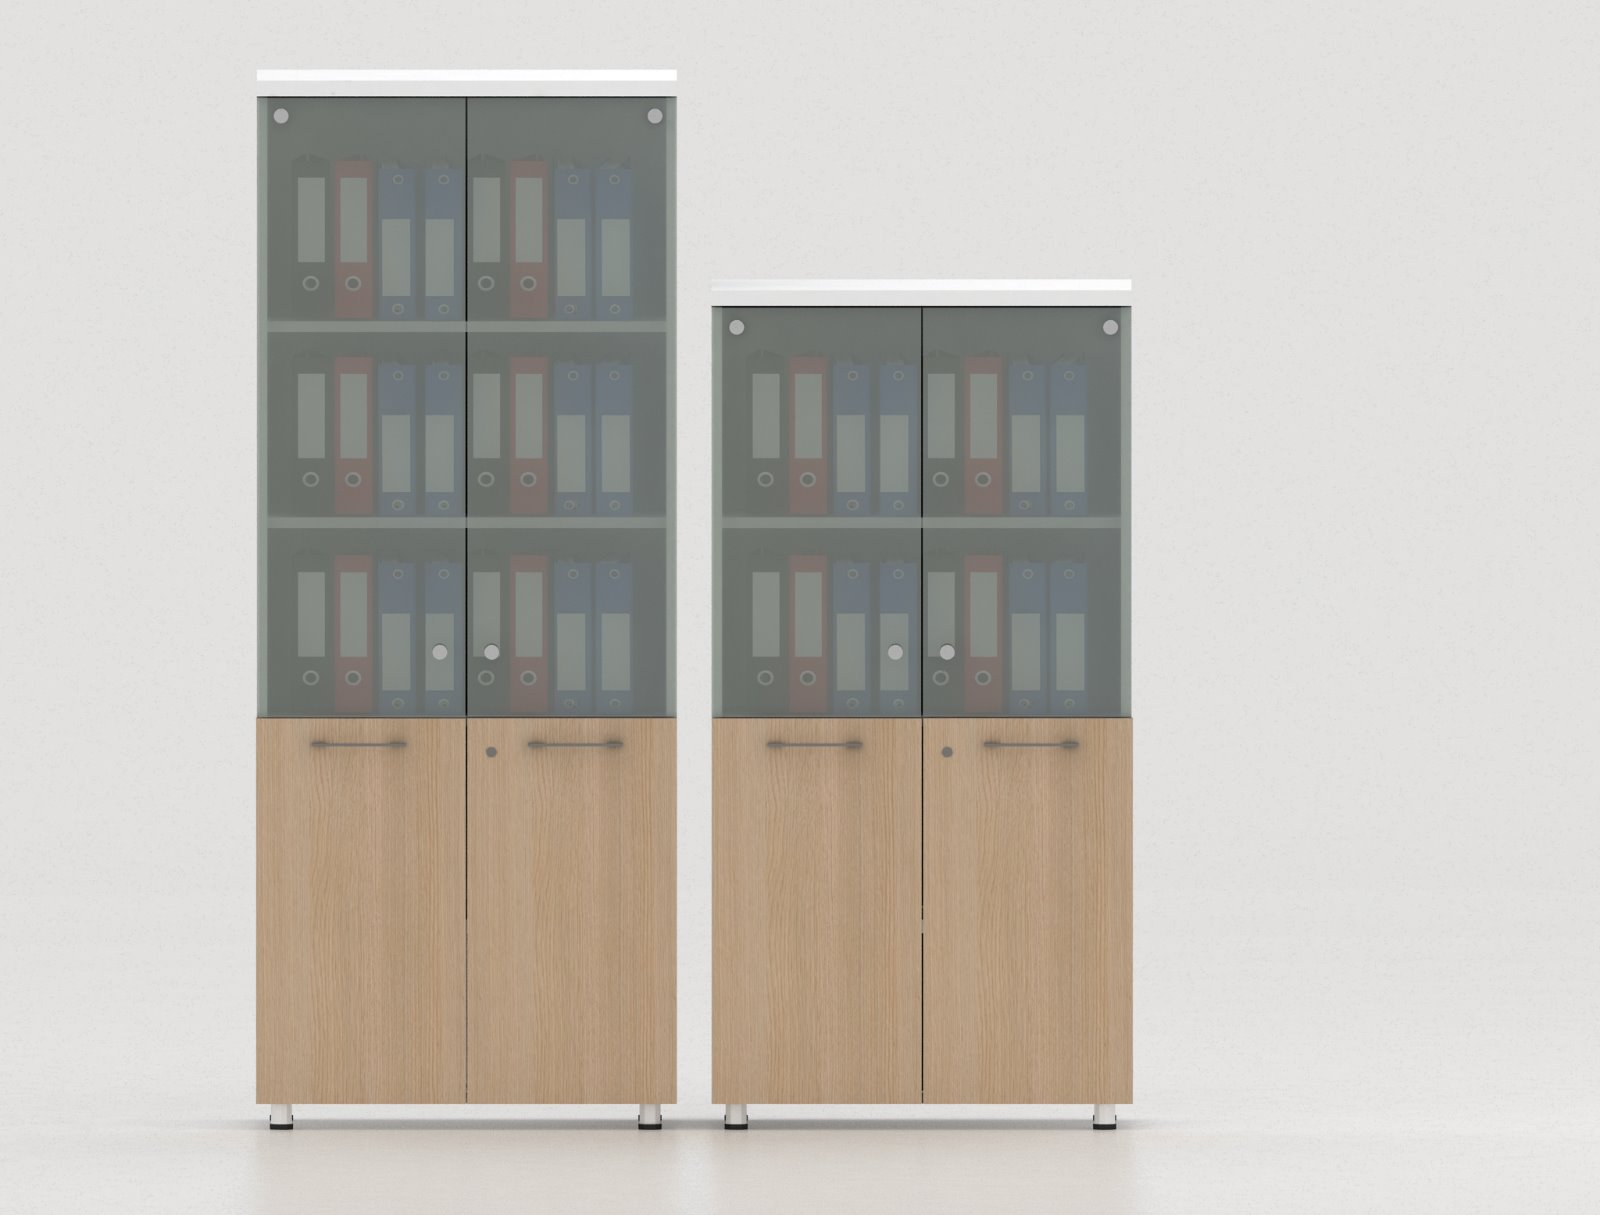 Group 13 (Cabinets With Doors And Glass Doors)